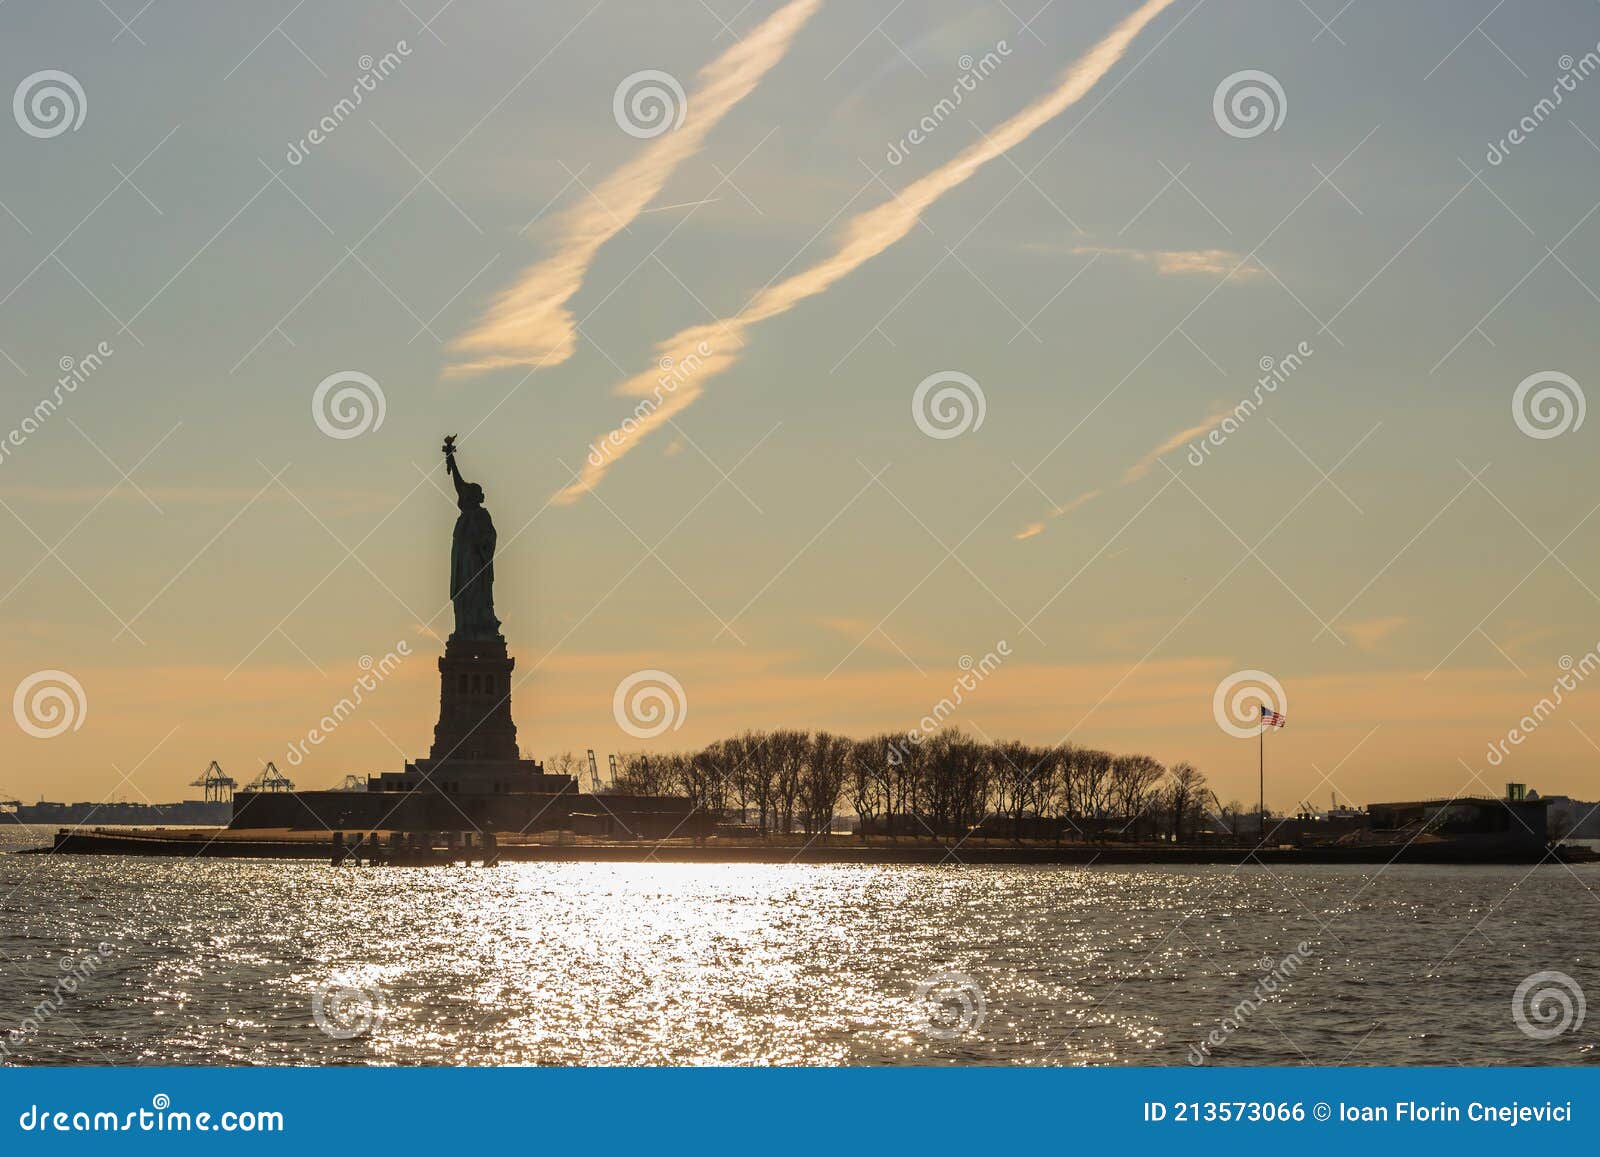 statue of liberty on liberty island in new york harbor